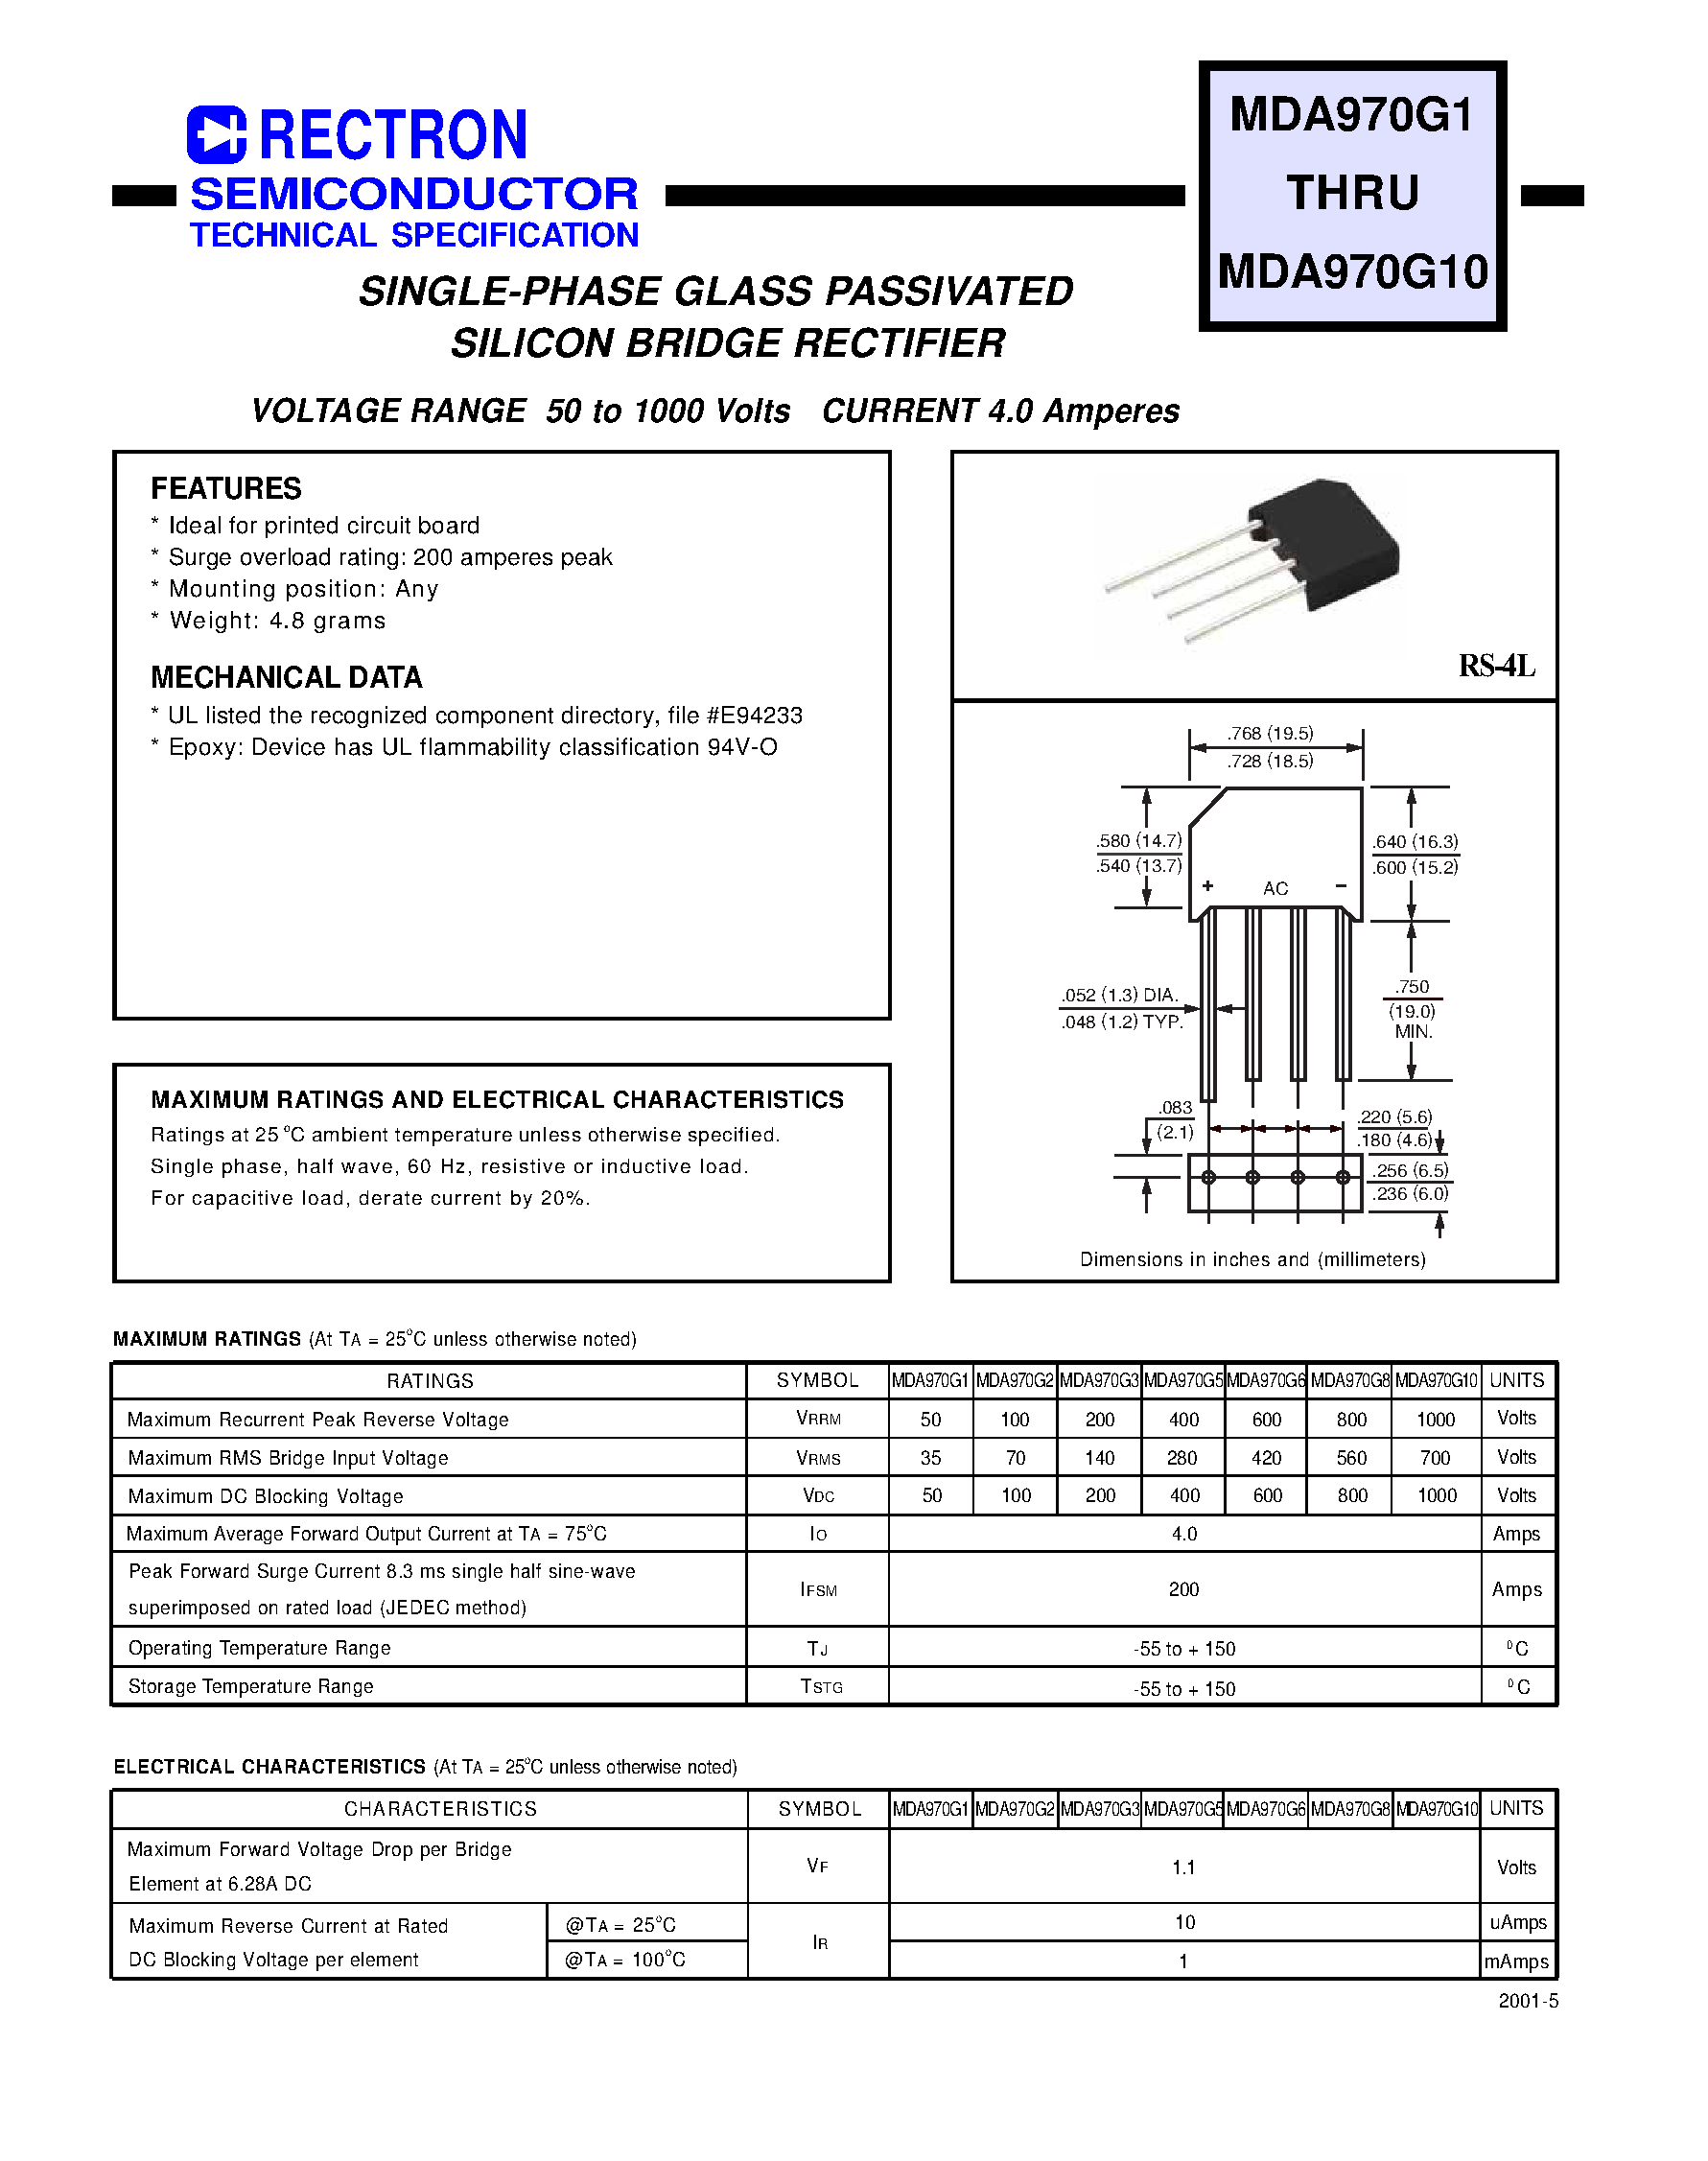 Даташит MDA970G8 - SINGLE-PHASE GLASS PASSIVATED SILICON BRIDGE RECTIFIER (VOLTAGE RANGE 50 to 1000 Volts CURRENT 4.0 Amperes) страница 1